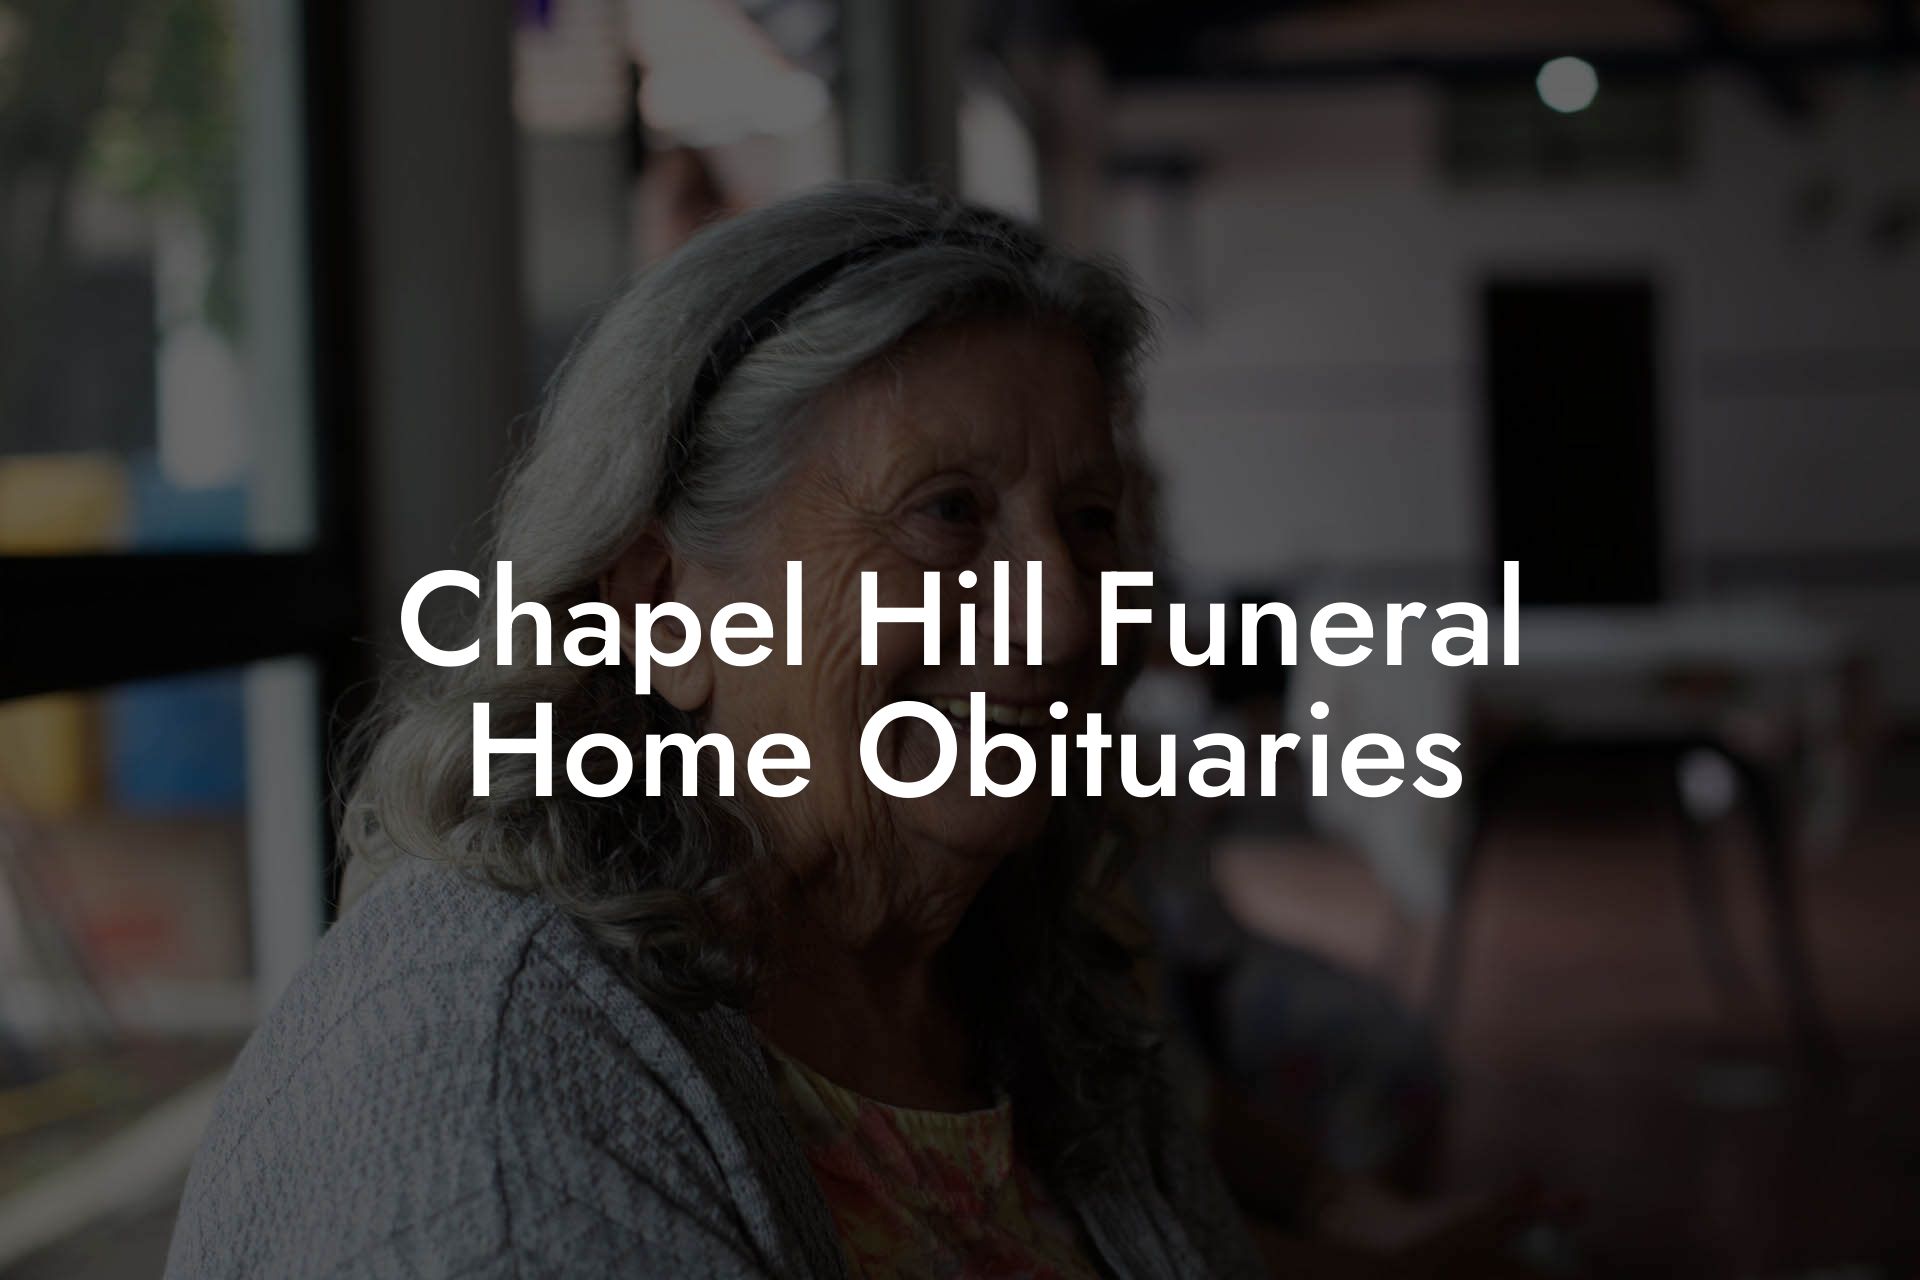 Chapel Hill Funeral Home Obituaries - Eulogy Assistant